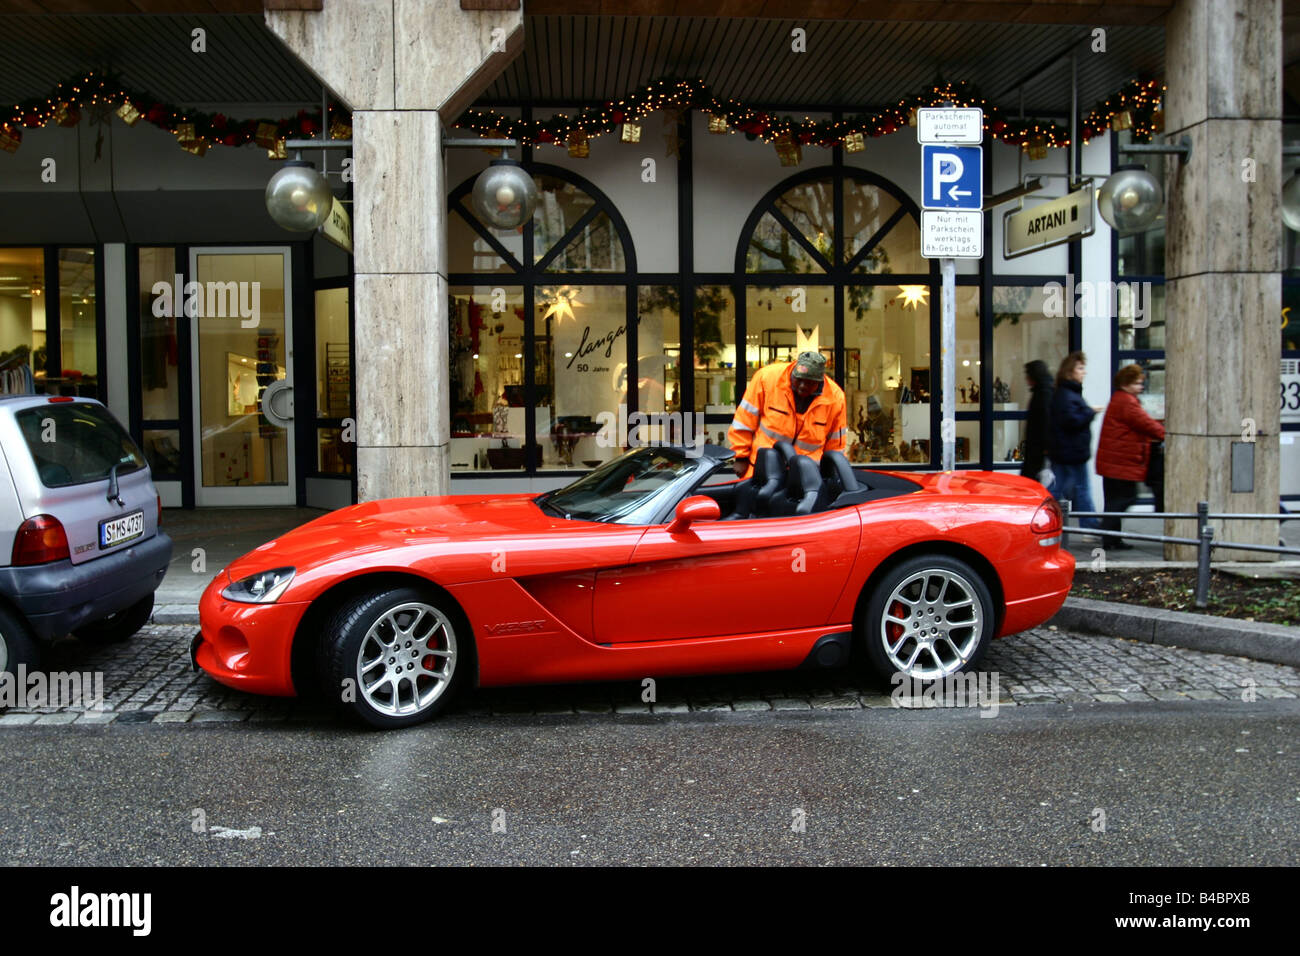 Car, Dodge Viper SRT-10, Convertible, model year 2003-, red, FGHDS, open top, standing, upholding, parked in, Car park, side vie Stock Photo